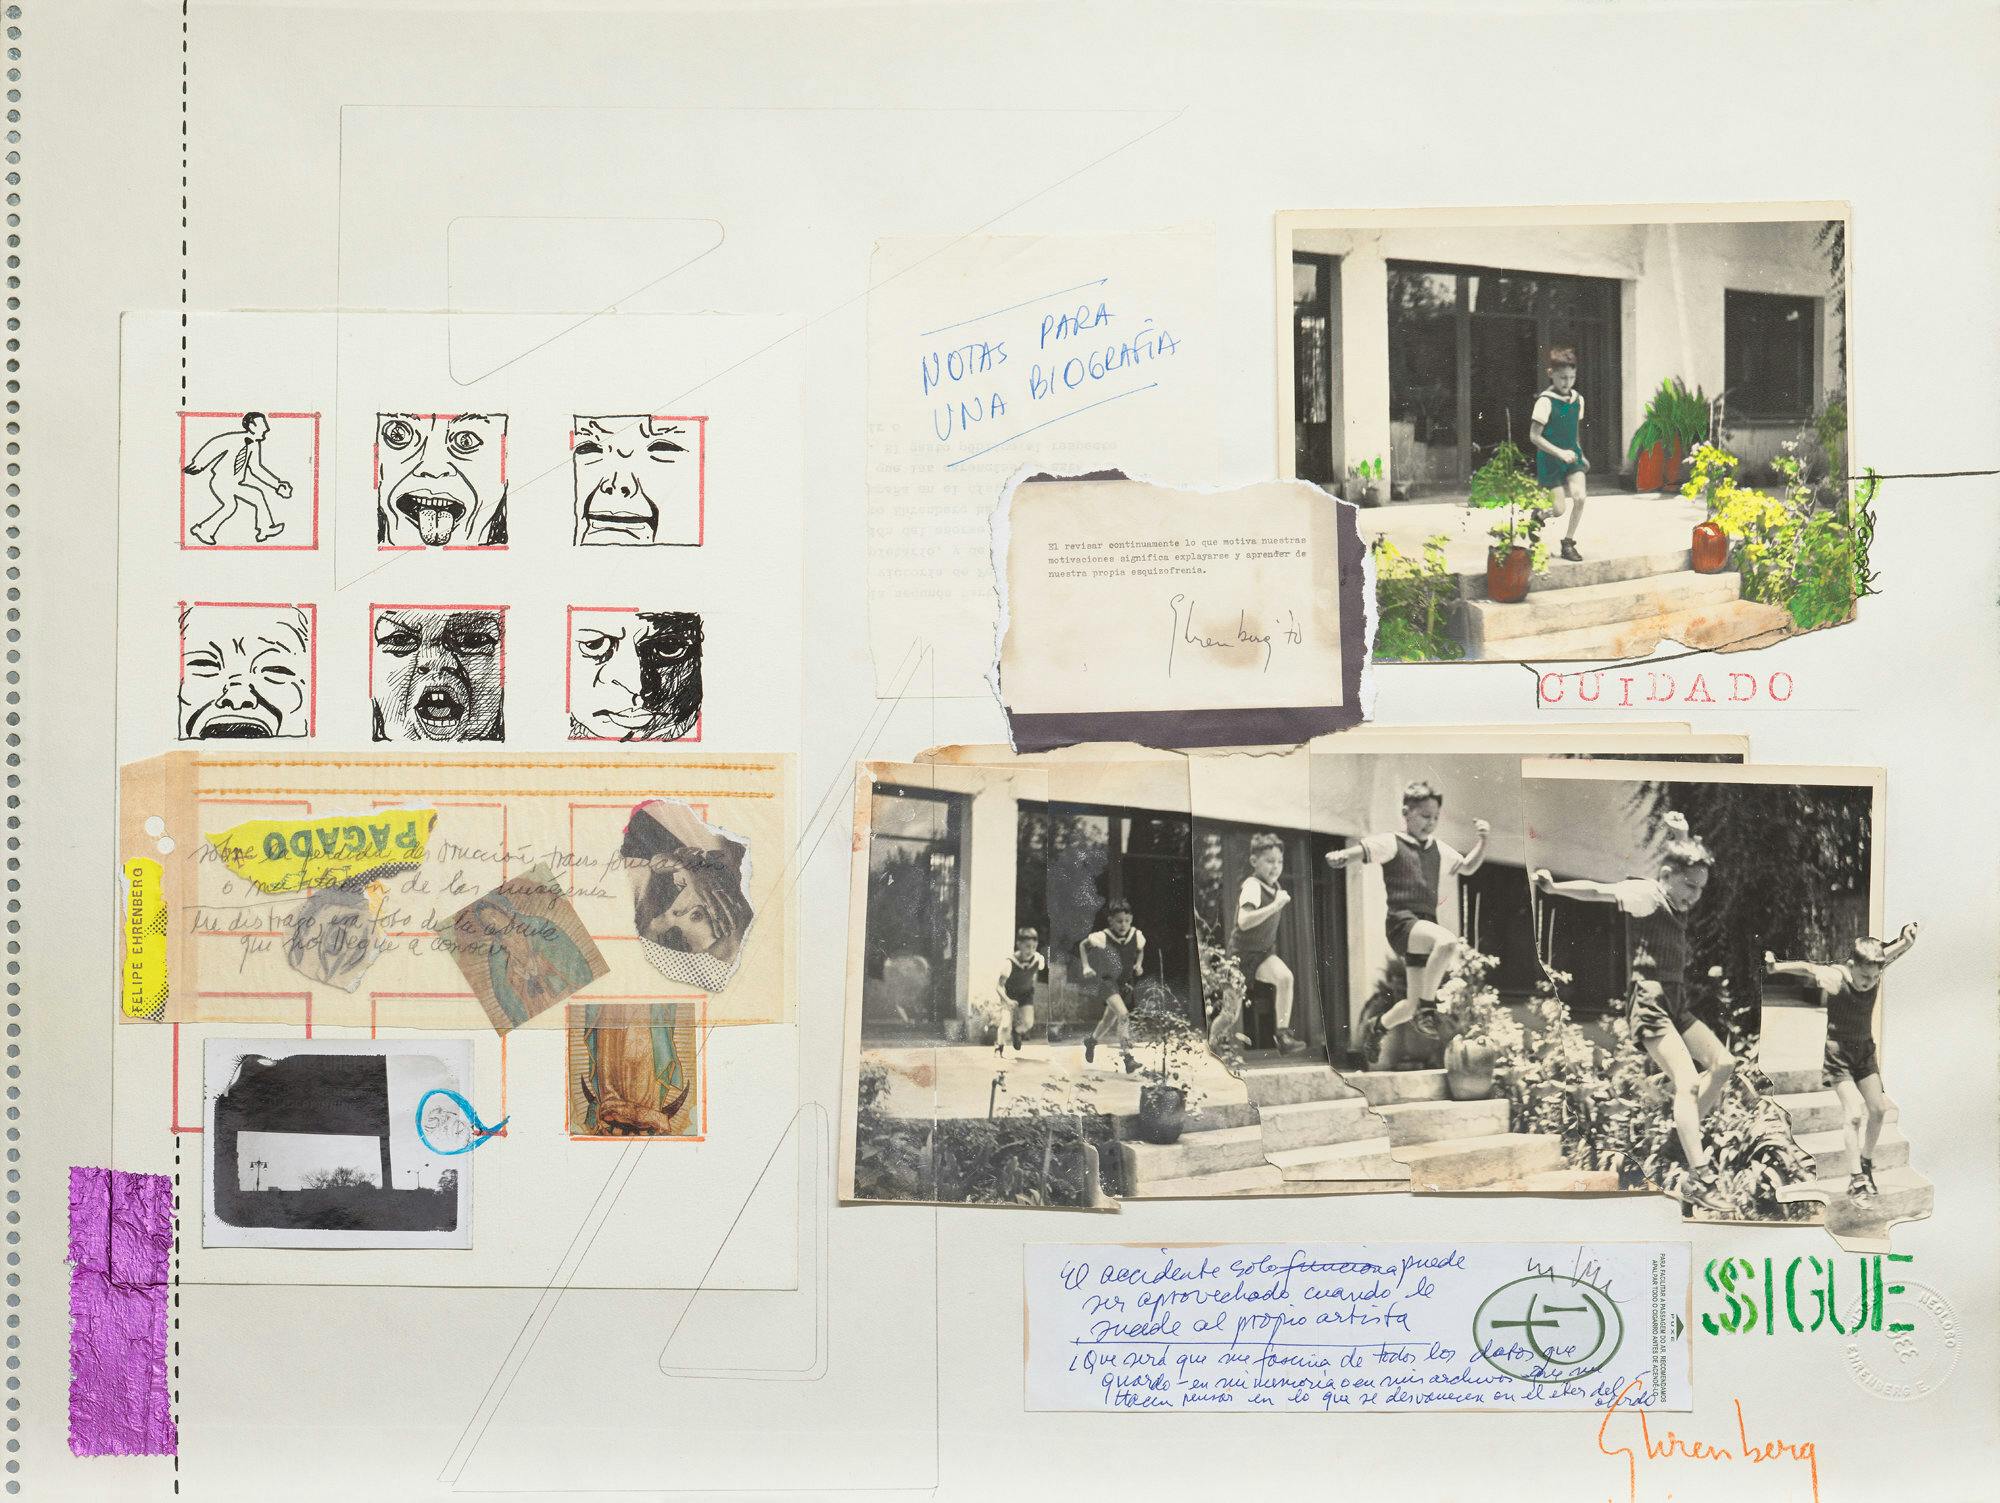 A collage showing black and white images of children, handwritten notes, and figure drawings.